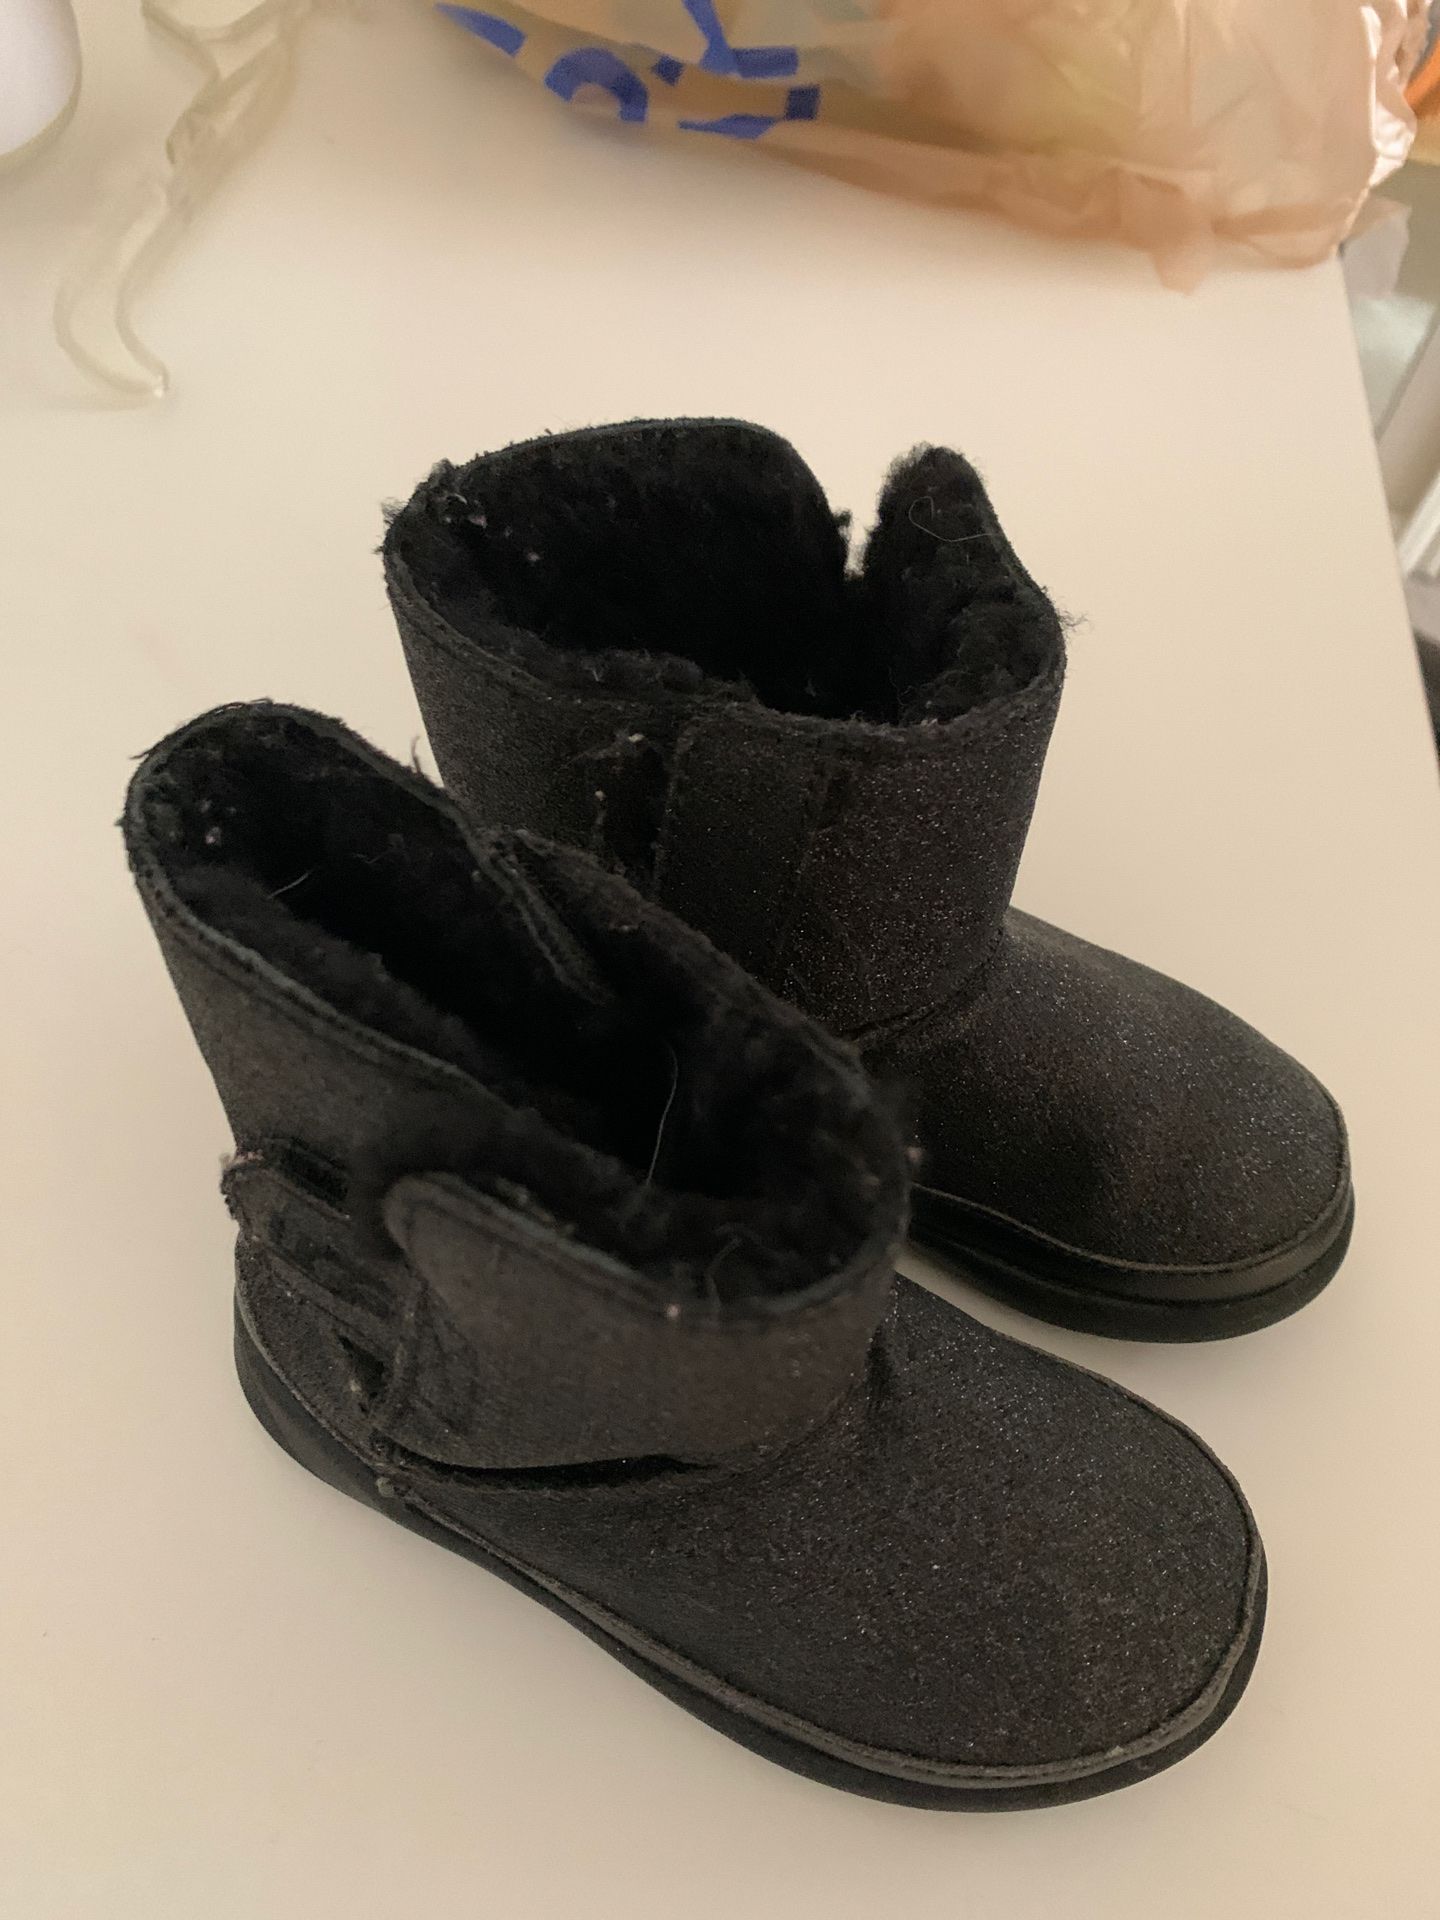 Ugg boots toddler size 5